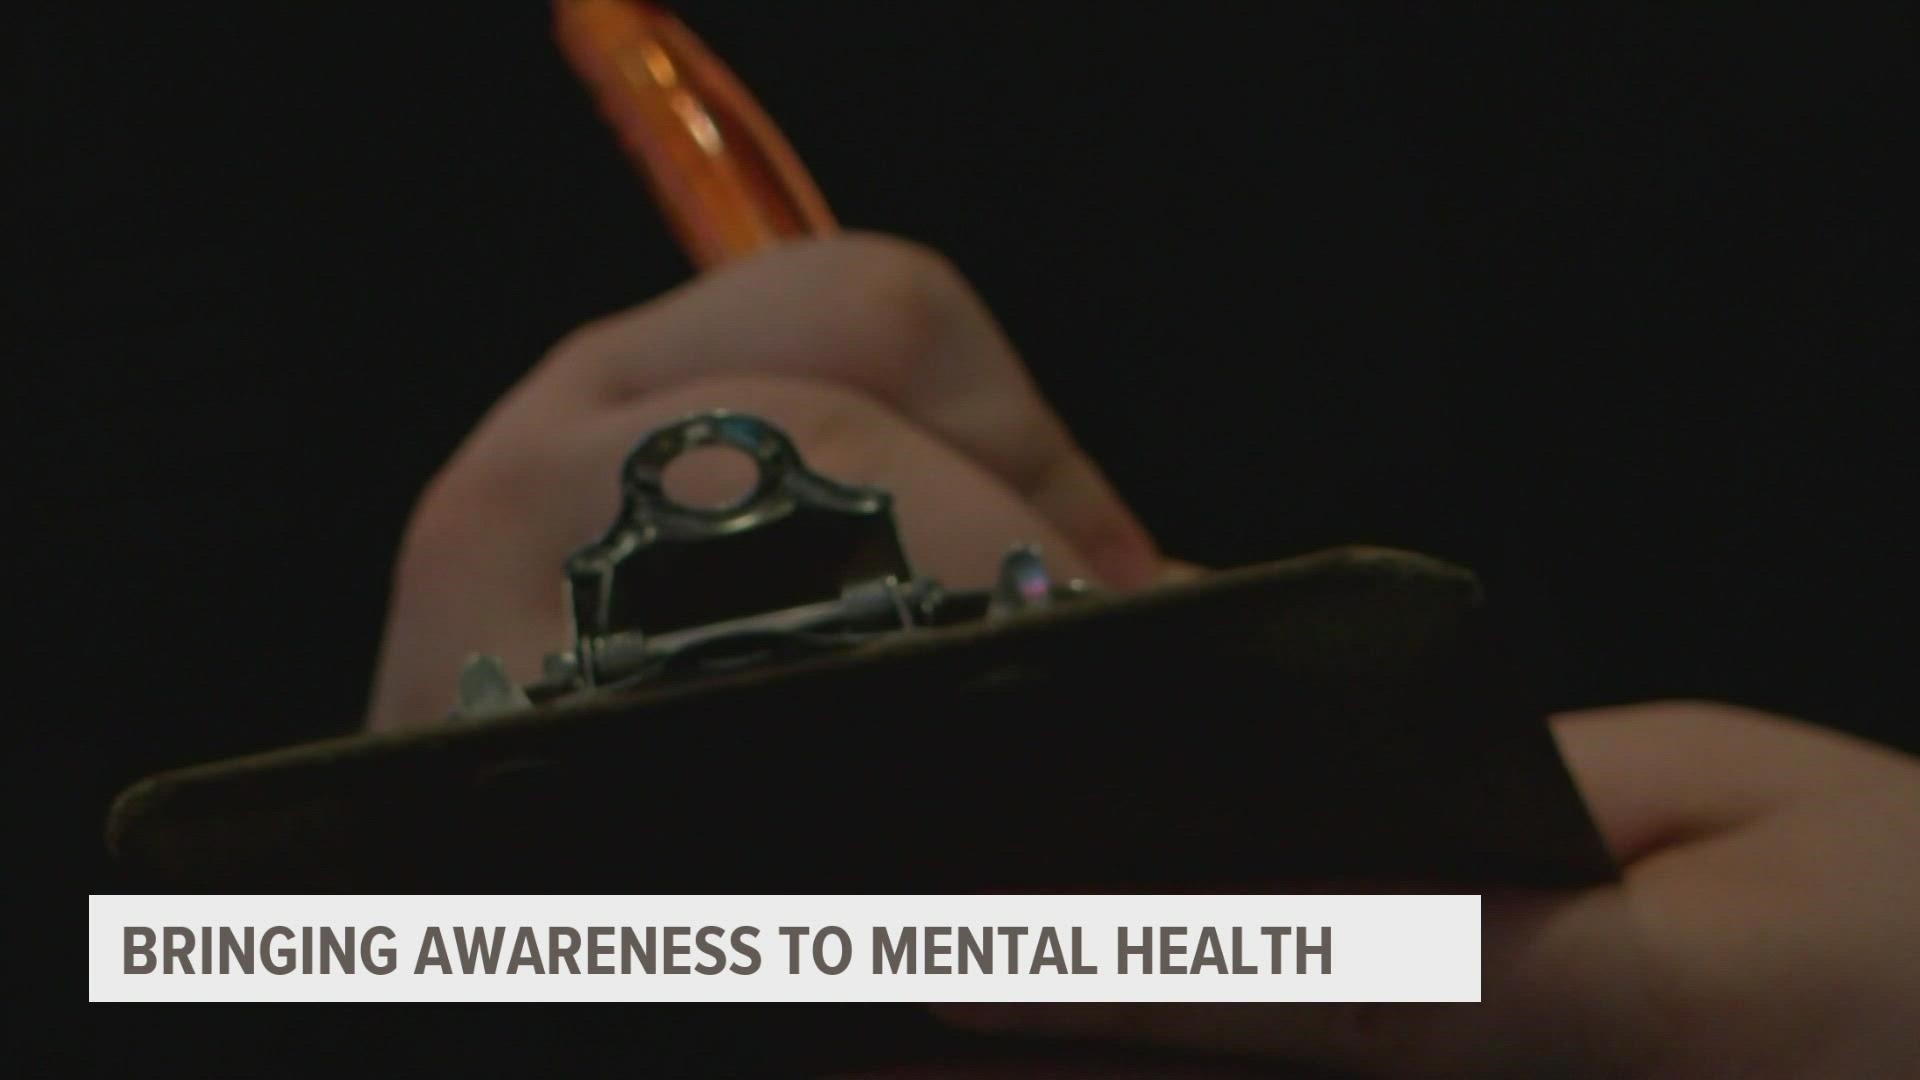 The week of October 3 - October 9 is  Mental Illness Awareness Week. CEO for Heart of Iowa Community Services said it's a time to shed light on a serious topic.